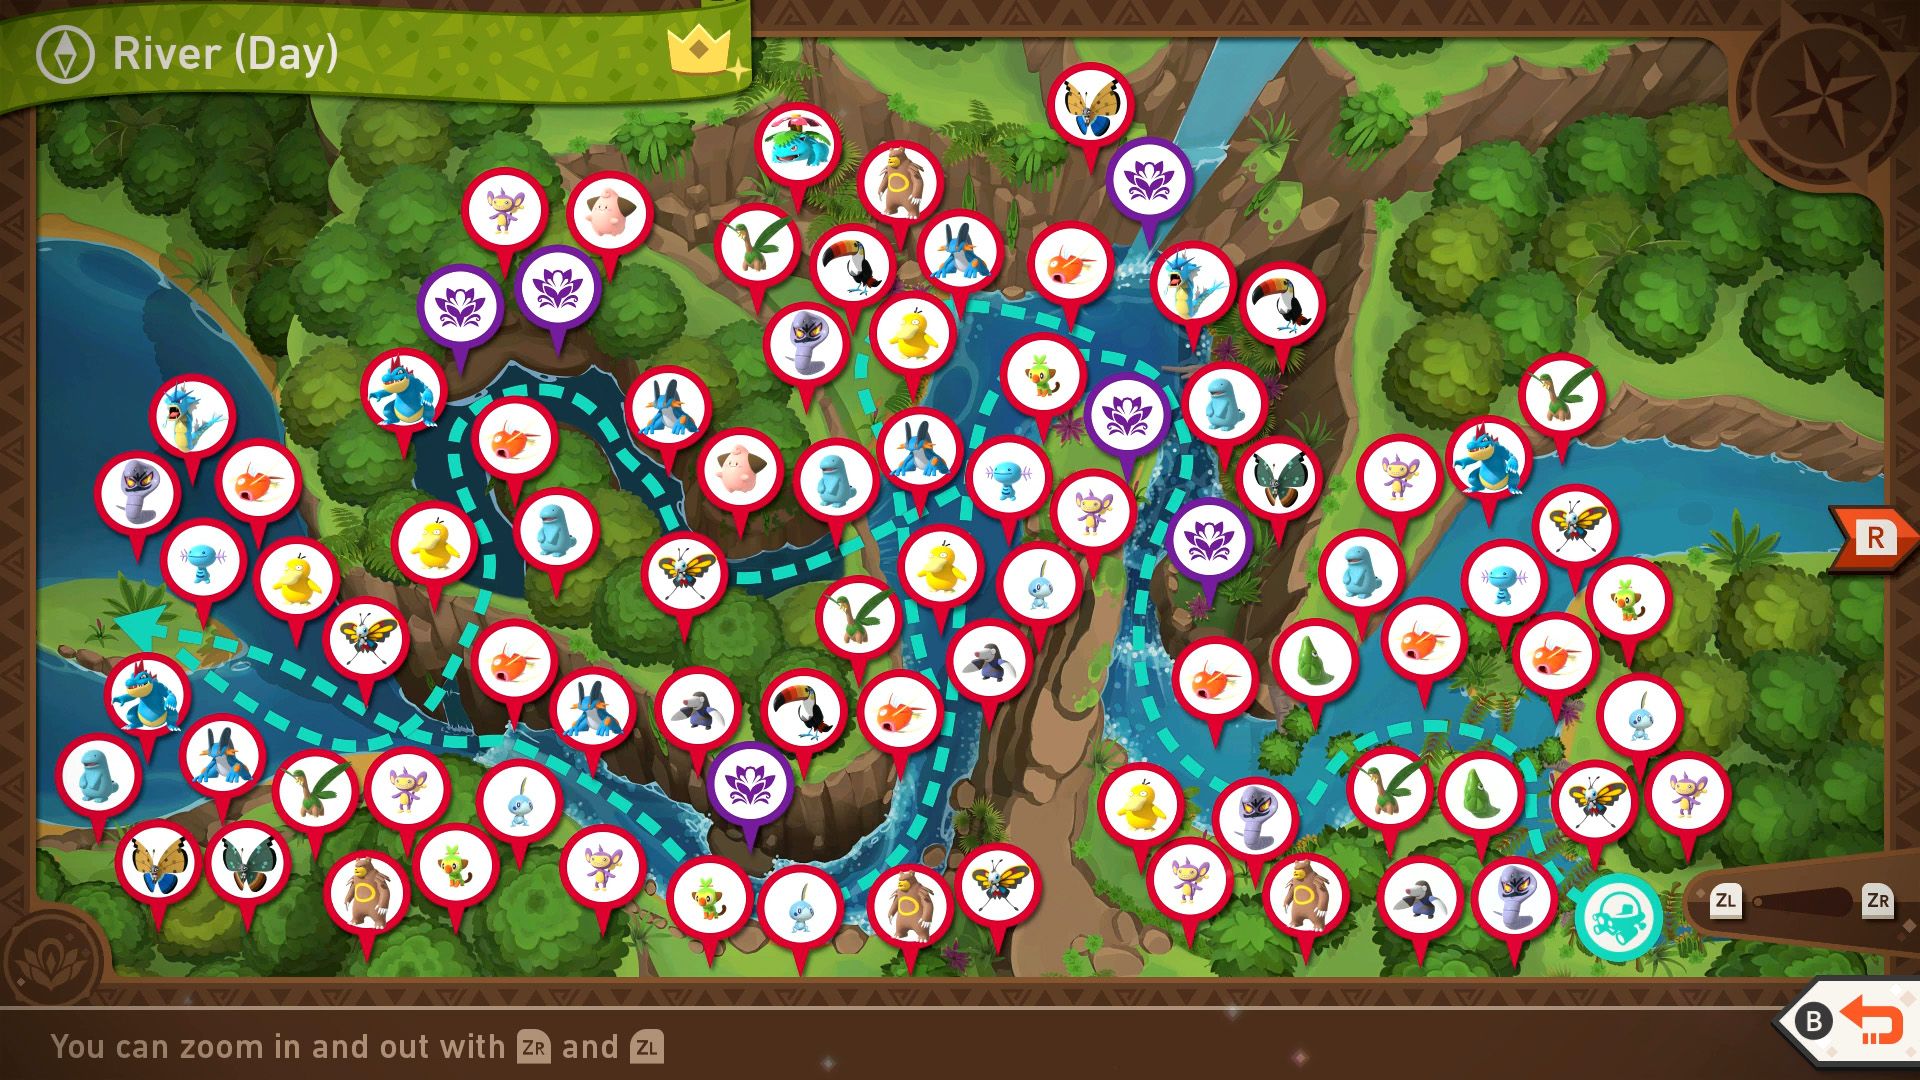 A complete map of the Mightywide River (Day) course in New Pokemon Snap